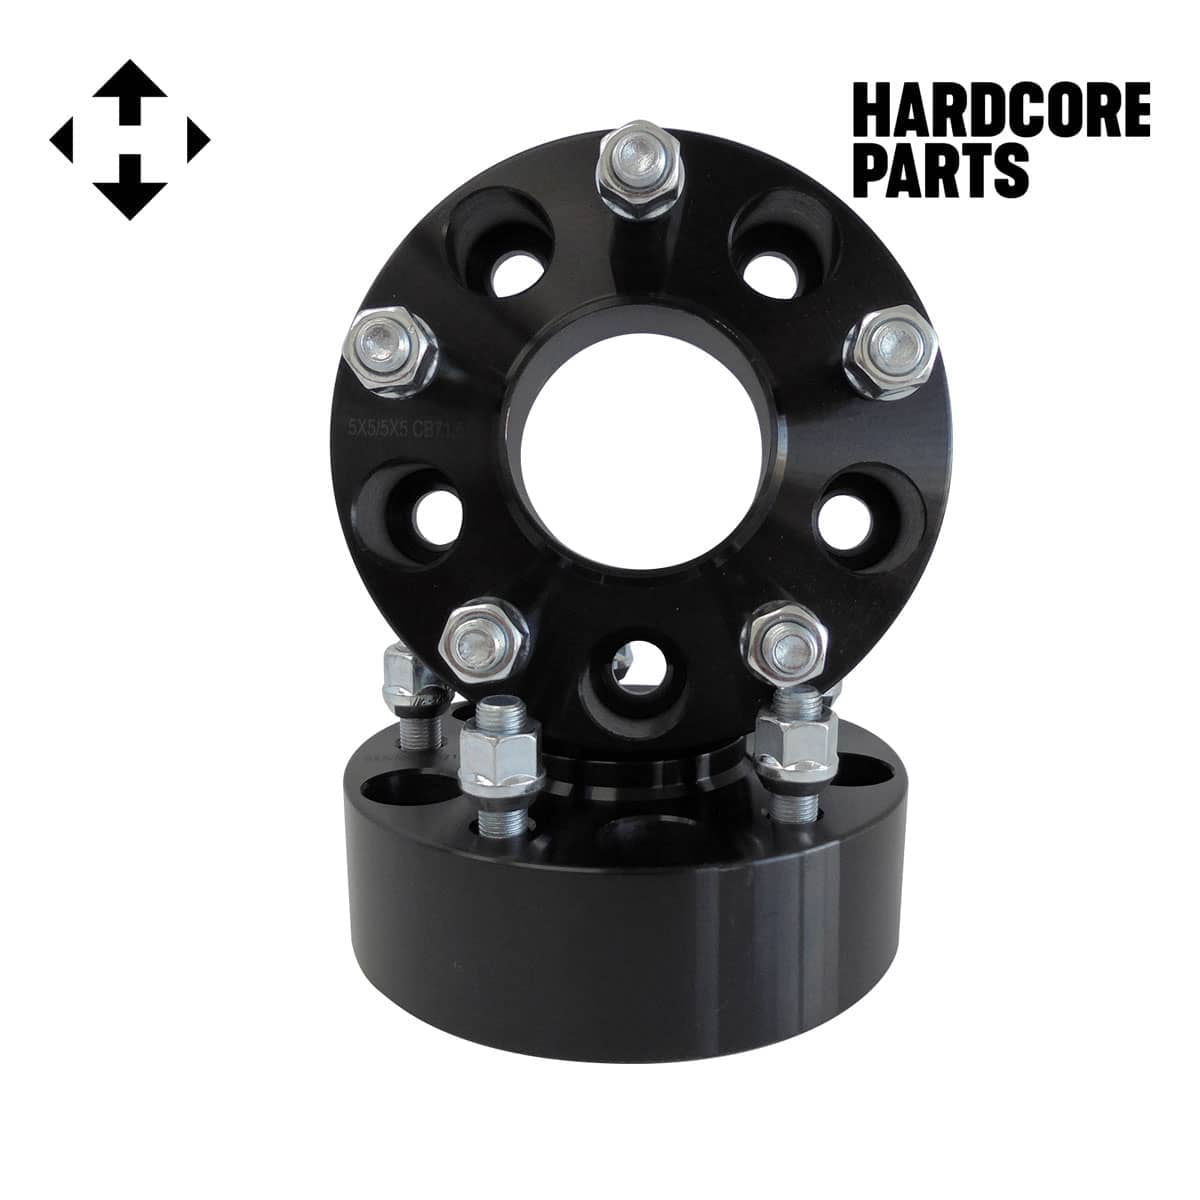 2 QTY Wheel Spacers Adapters 4 2 inch Per Side Hubcentric vehicle to 5x5 wheel patterns with 1/2 x 20 threads fits Jeep Wrangler JK Rubicon 5x127 fits all 5x5 